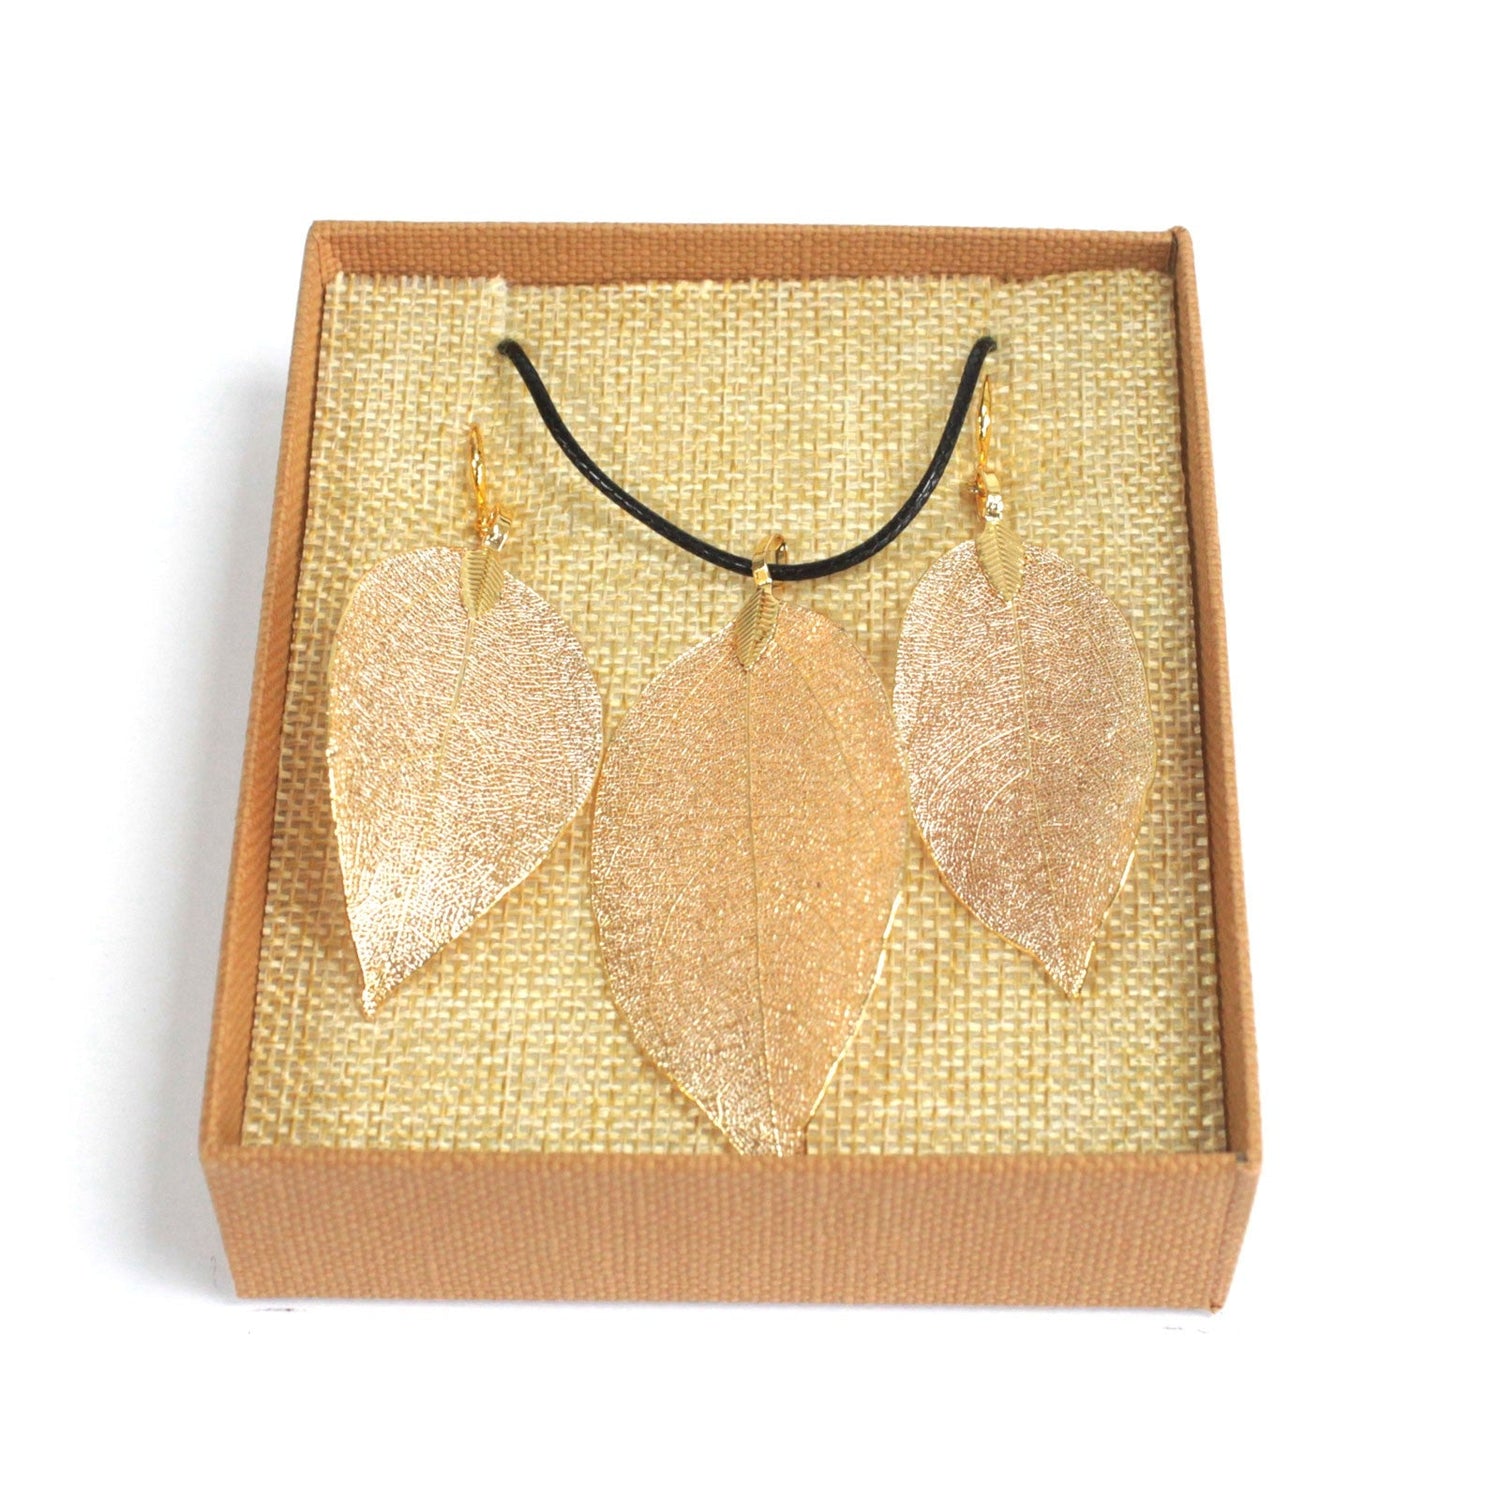 Bravery Leaf Necklace and Earrings Set - Floral Fawna